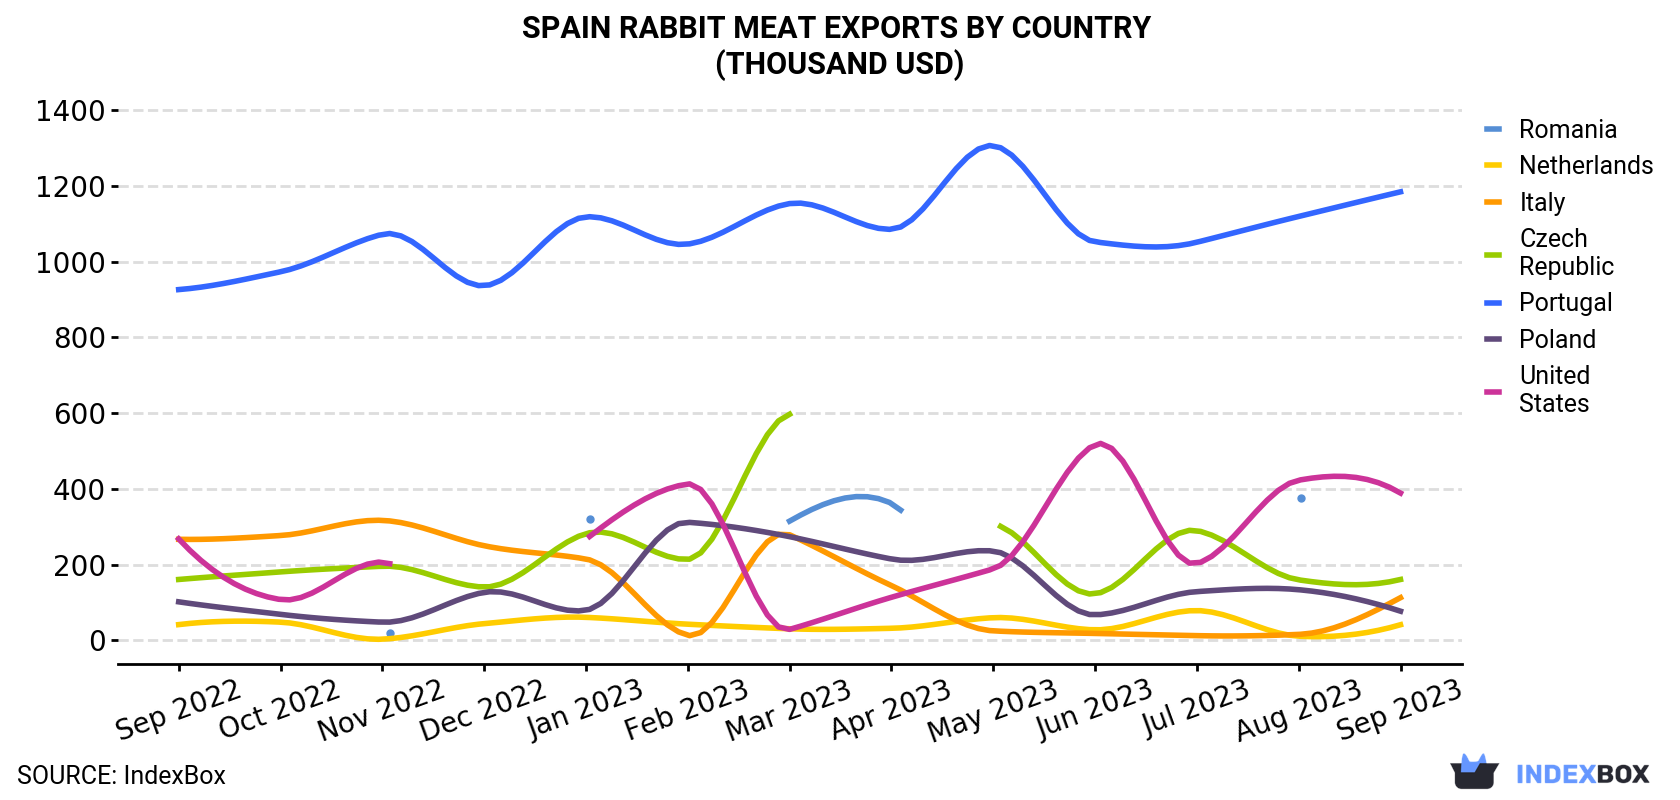 Spain Rabbit Meat Exports By Country (Thousand USD)